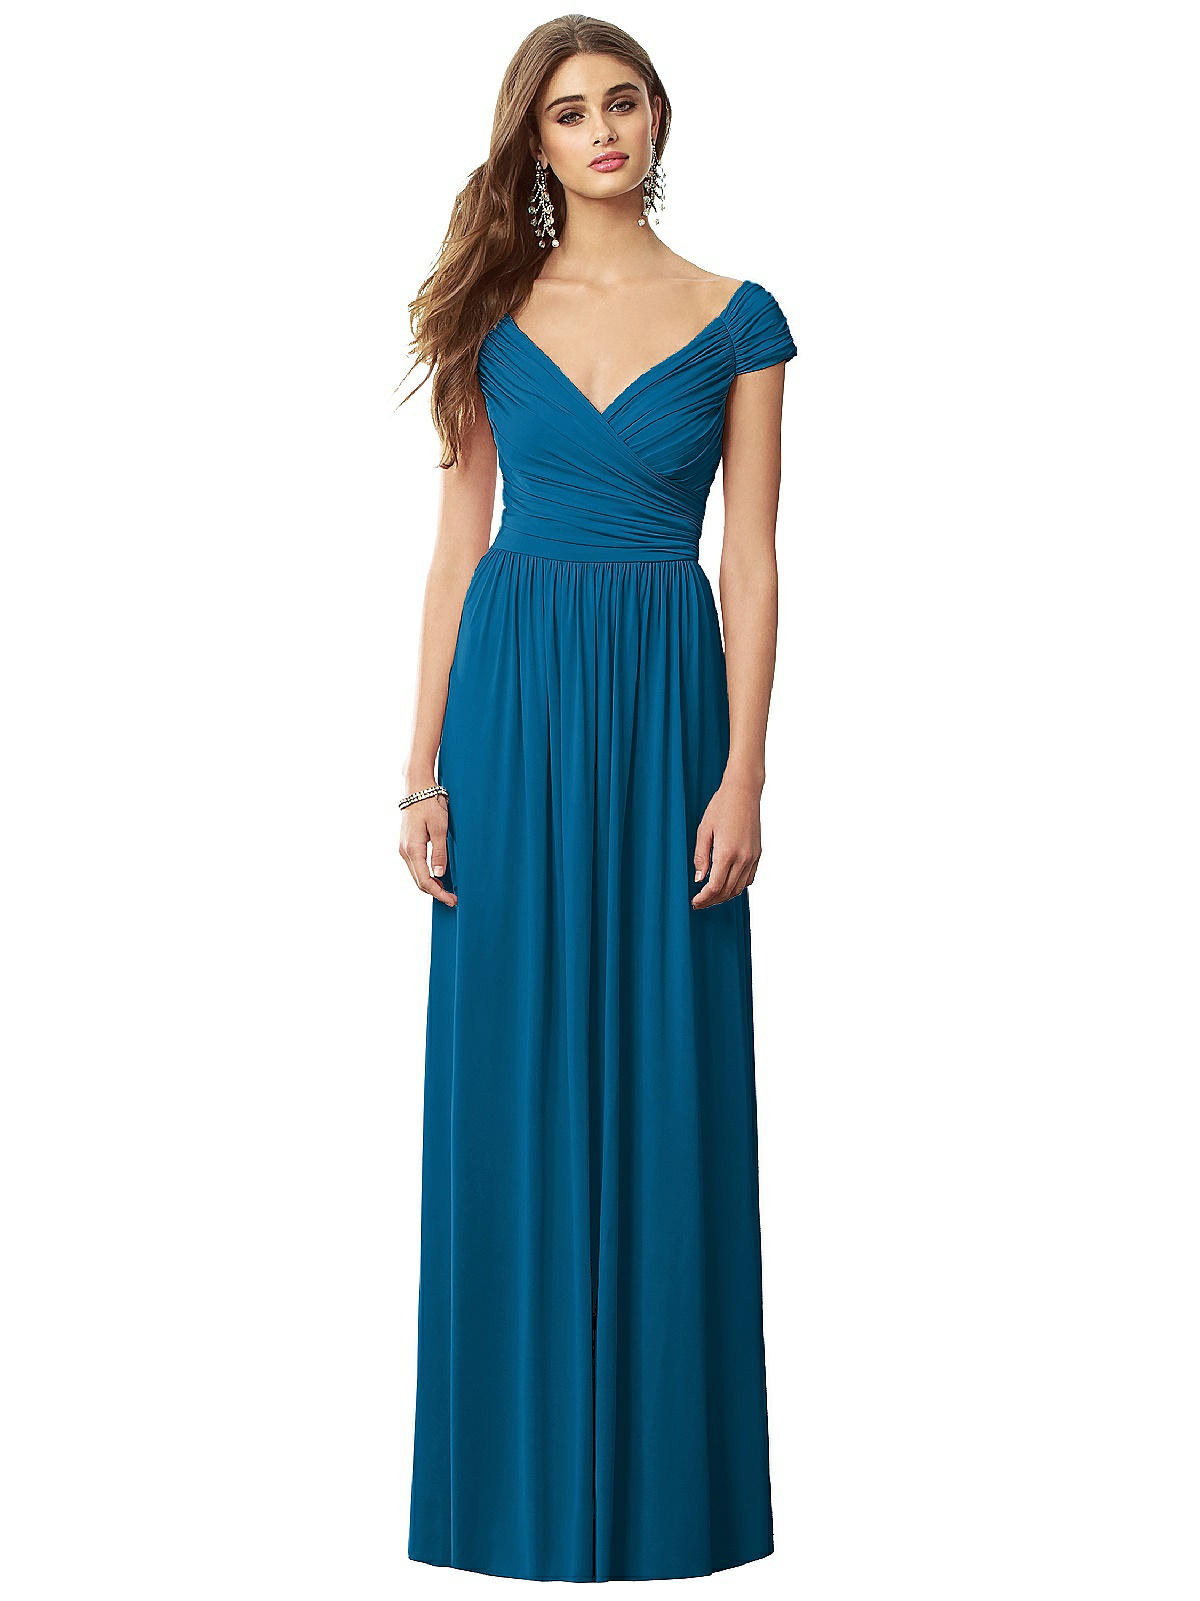 Dress In Group The Six 6697 After Dessy | Ocean Blue Bridesmaid